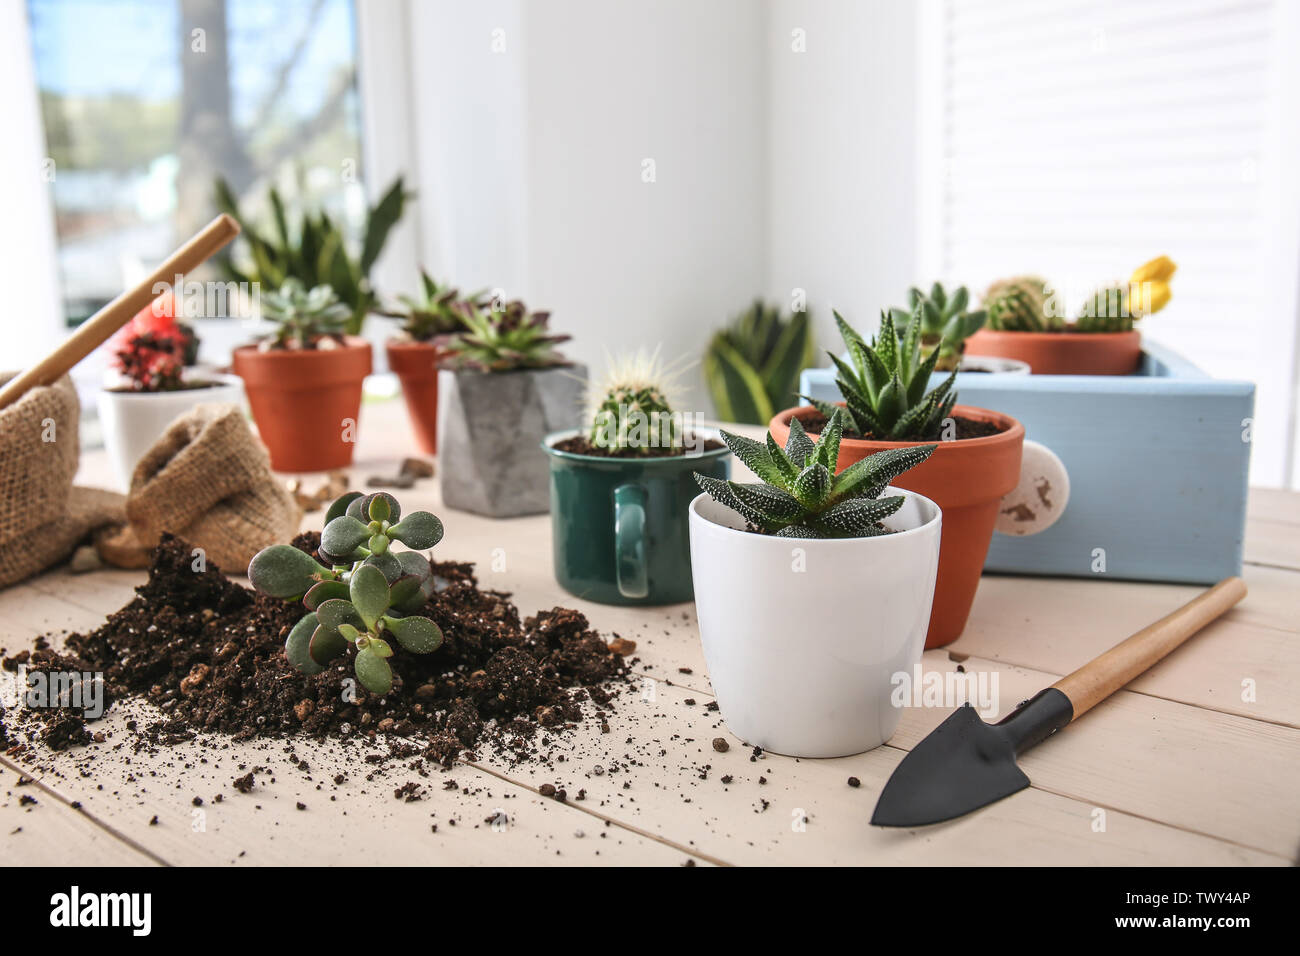 Succulents in pots on wooden table Stock Photo